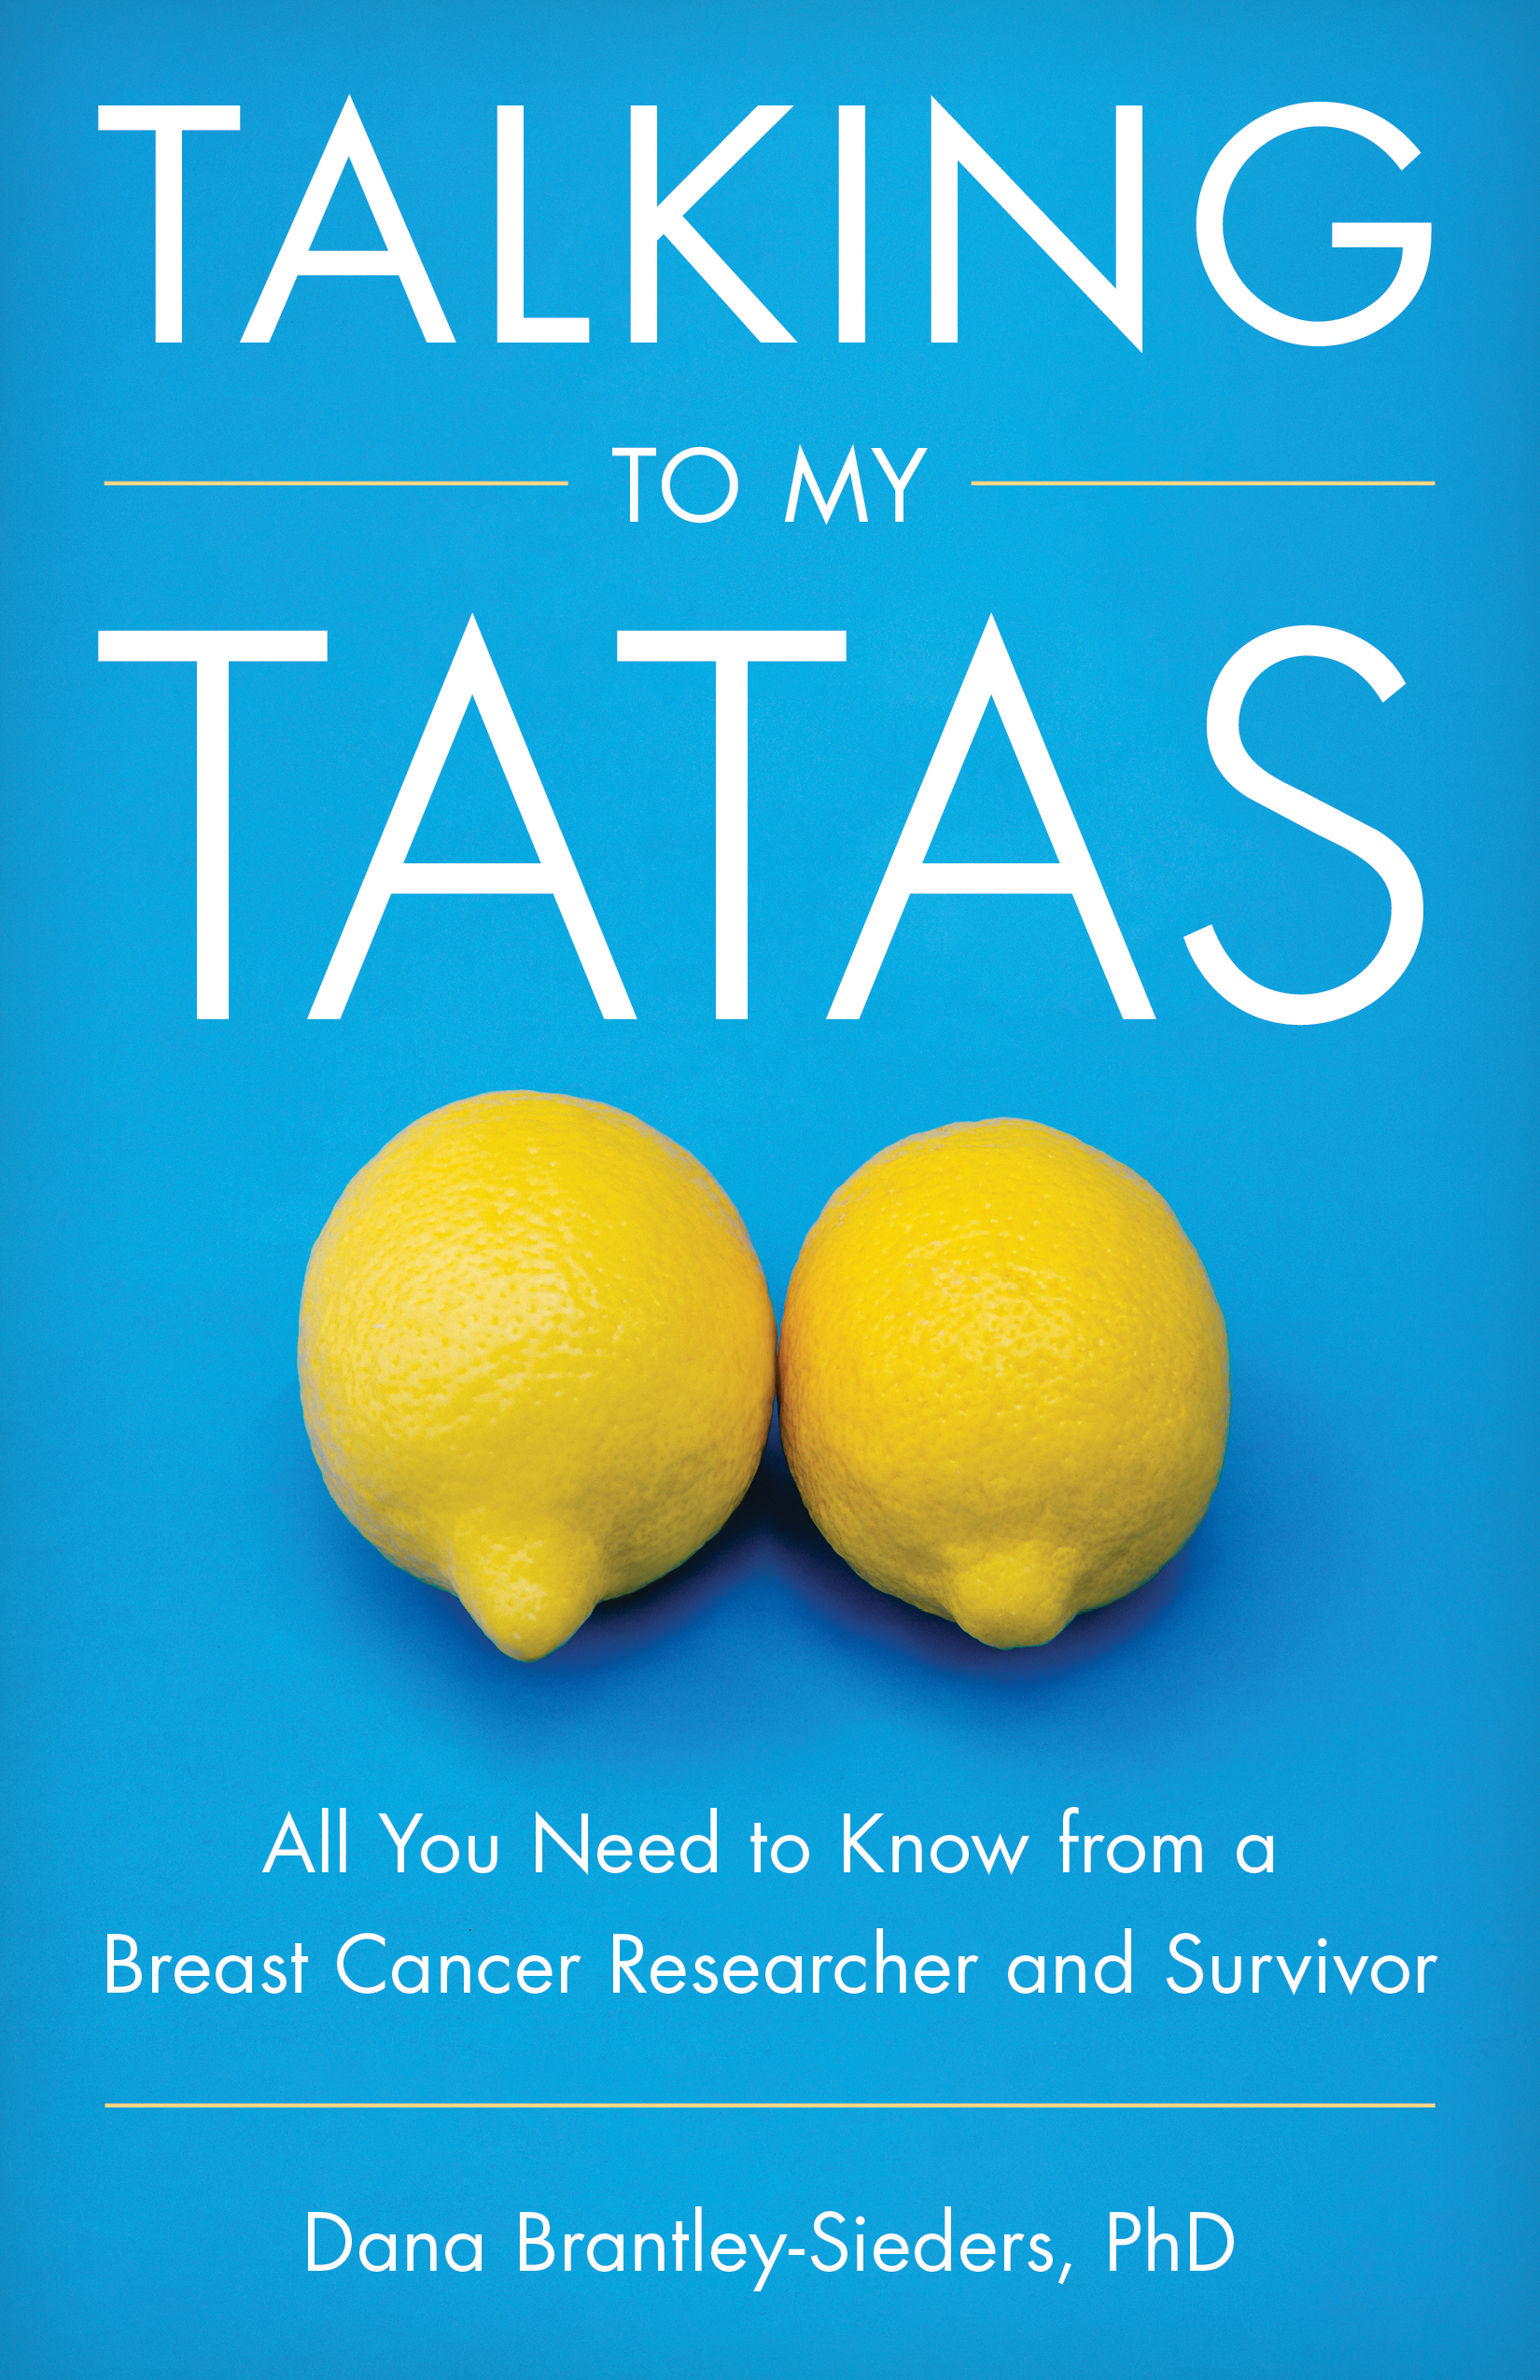 Talking to My Tatas: All You Need to Know from a Breast Cancer Researcher and Survivor